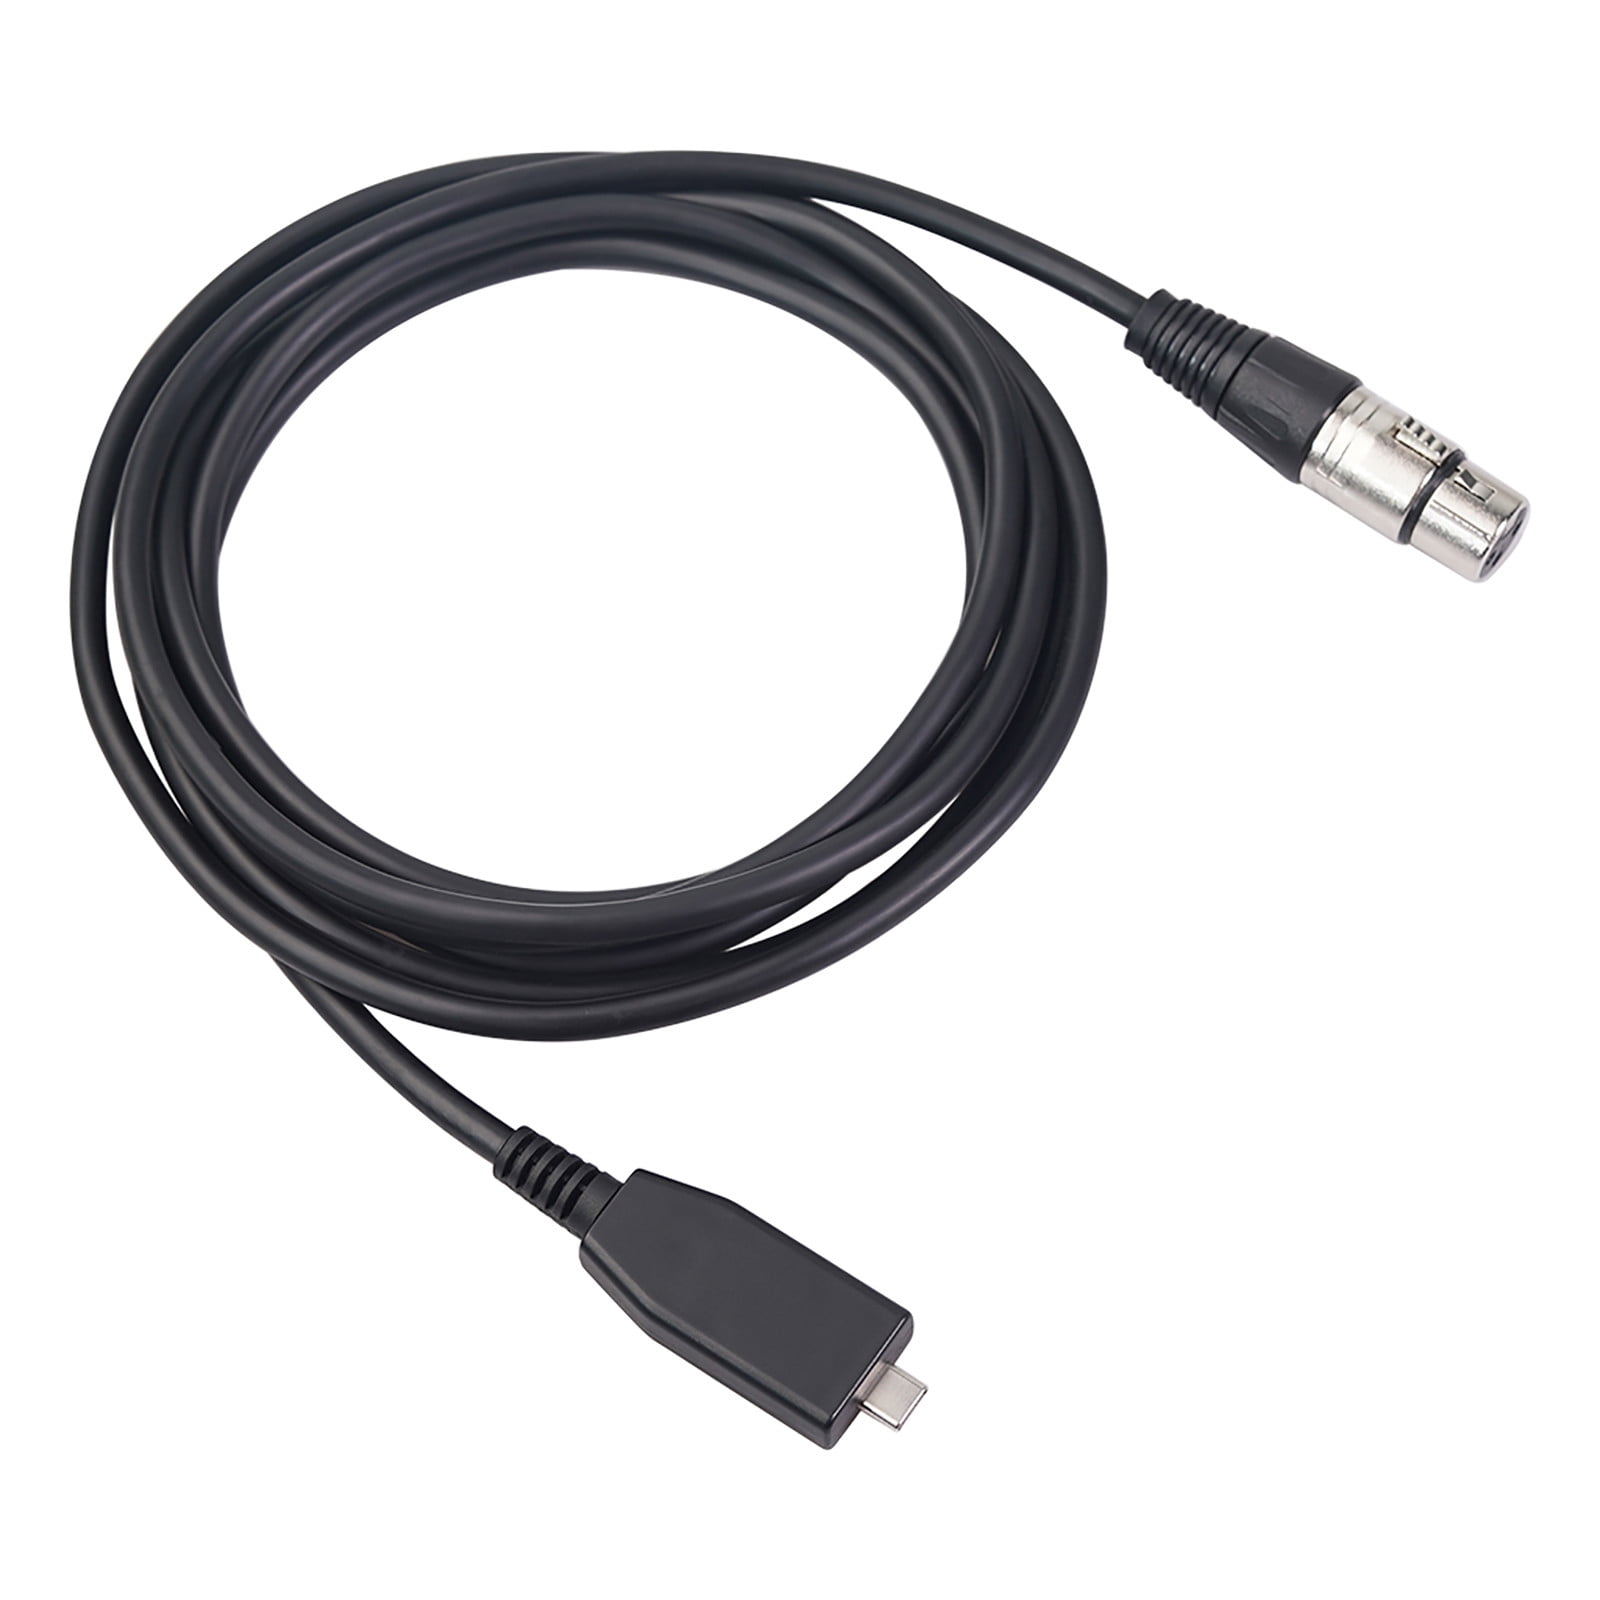 DISINO USB Microphone Cable XLR Female to USB Mic Link Converter Cable for  Microphones (USB to XLR) 